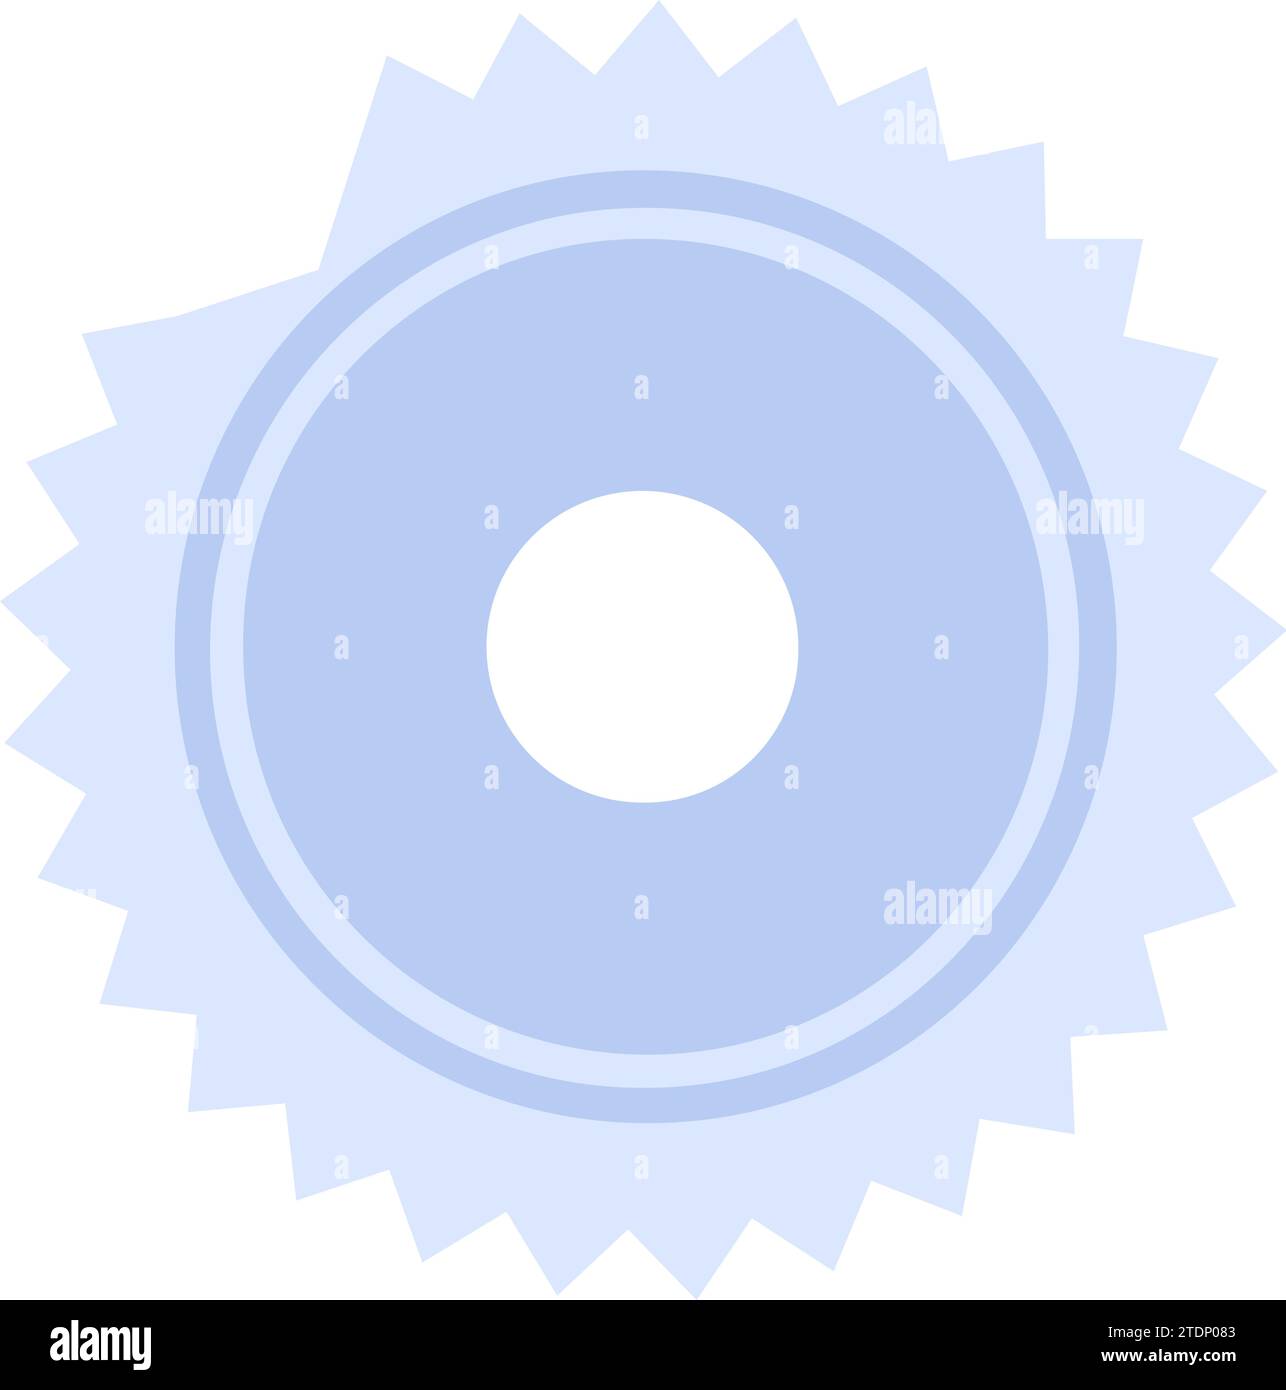 Metal waste pollution. Circular saw blade icon. Disposal of waste of carpentry metalworking workshop and industry. Metallurgy waste separation problem Stock Vector